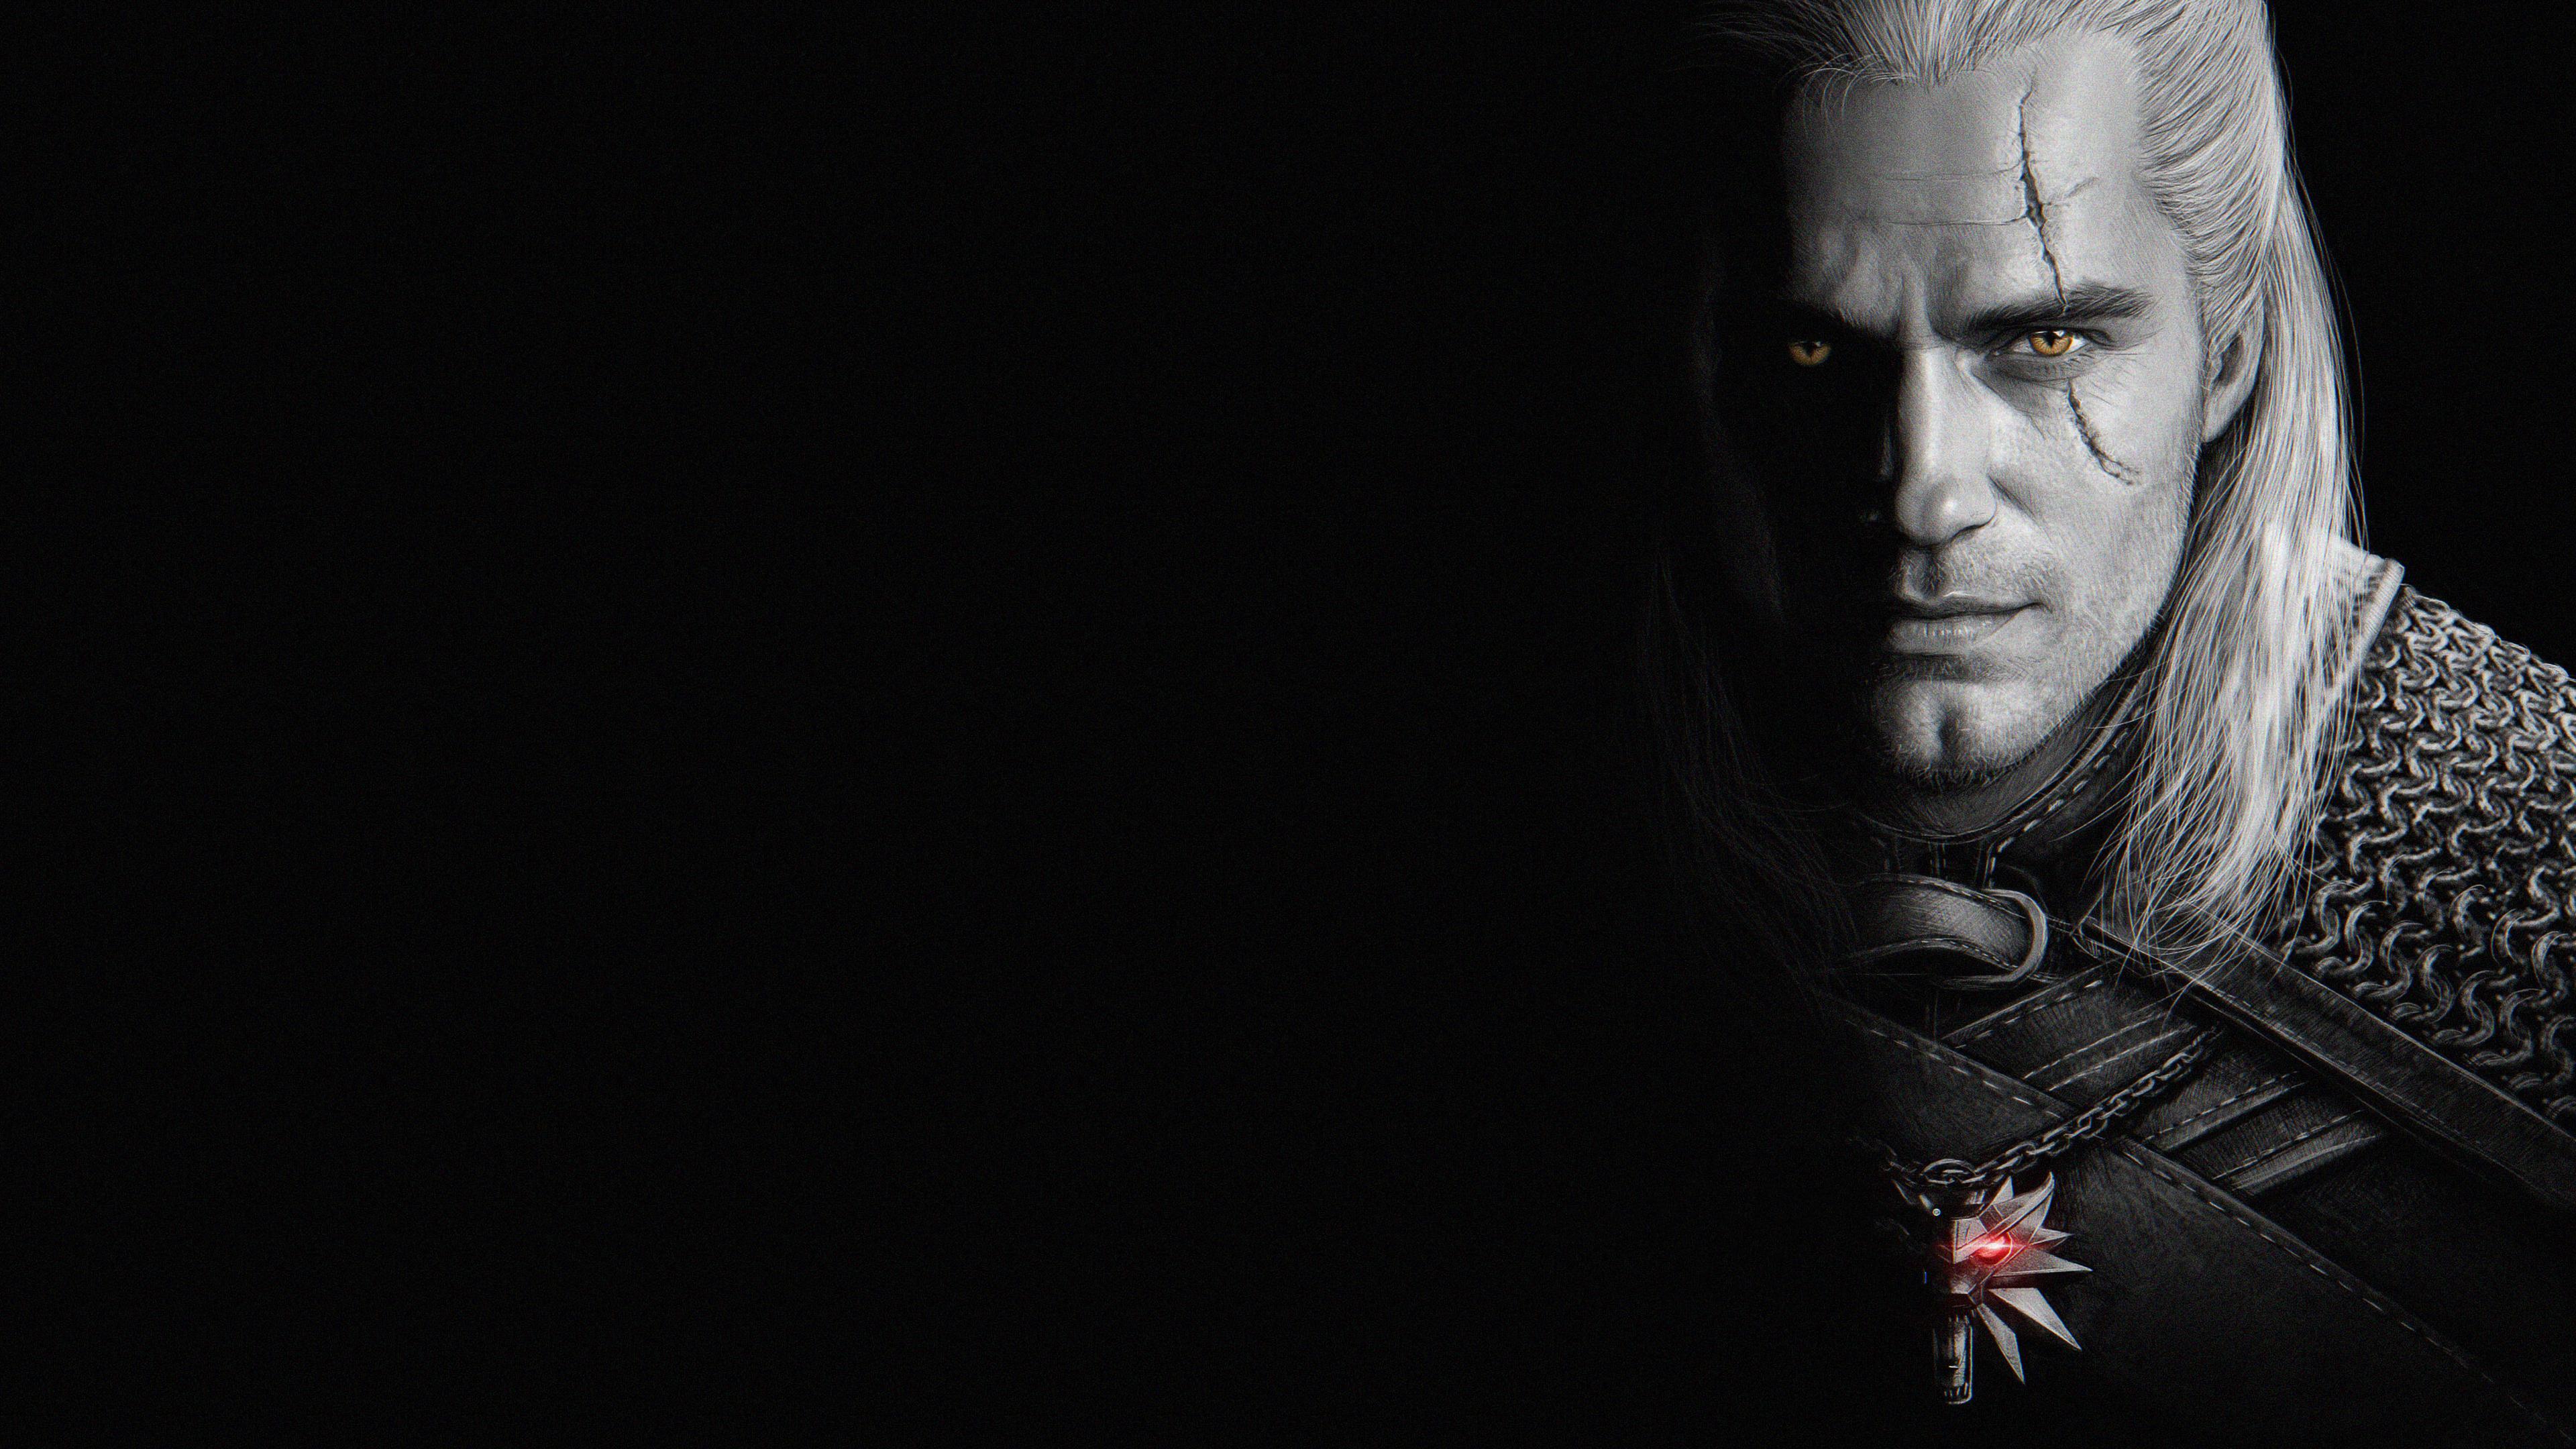 The Witcher wallpapers and backgrounds download for free | Page 1